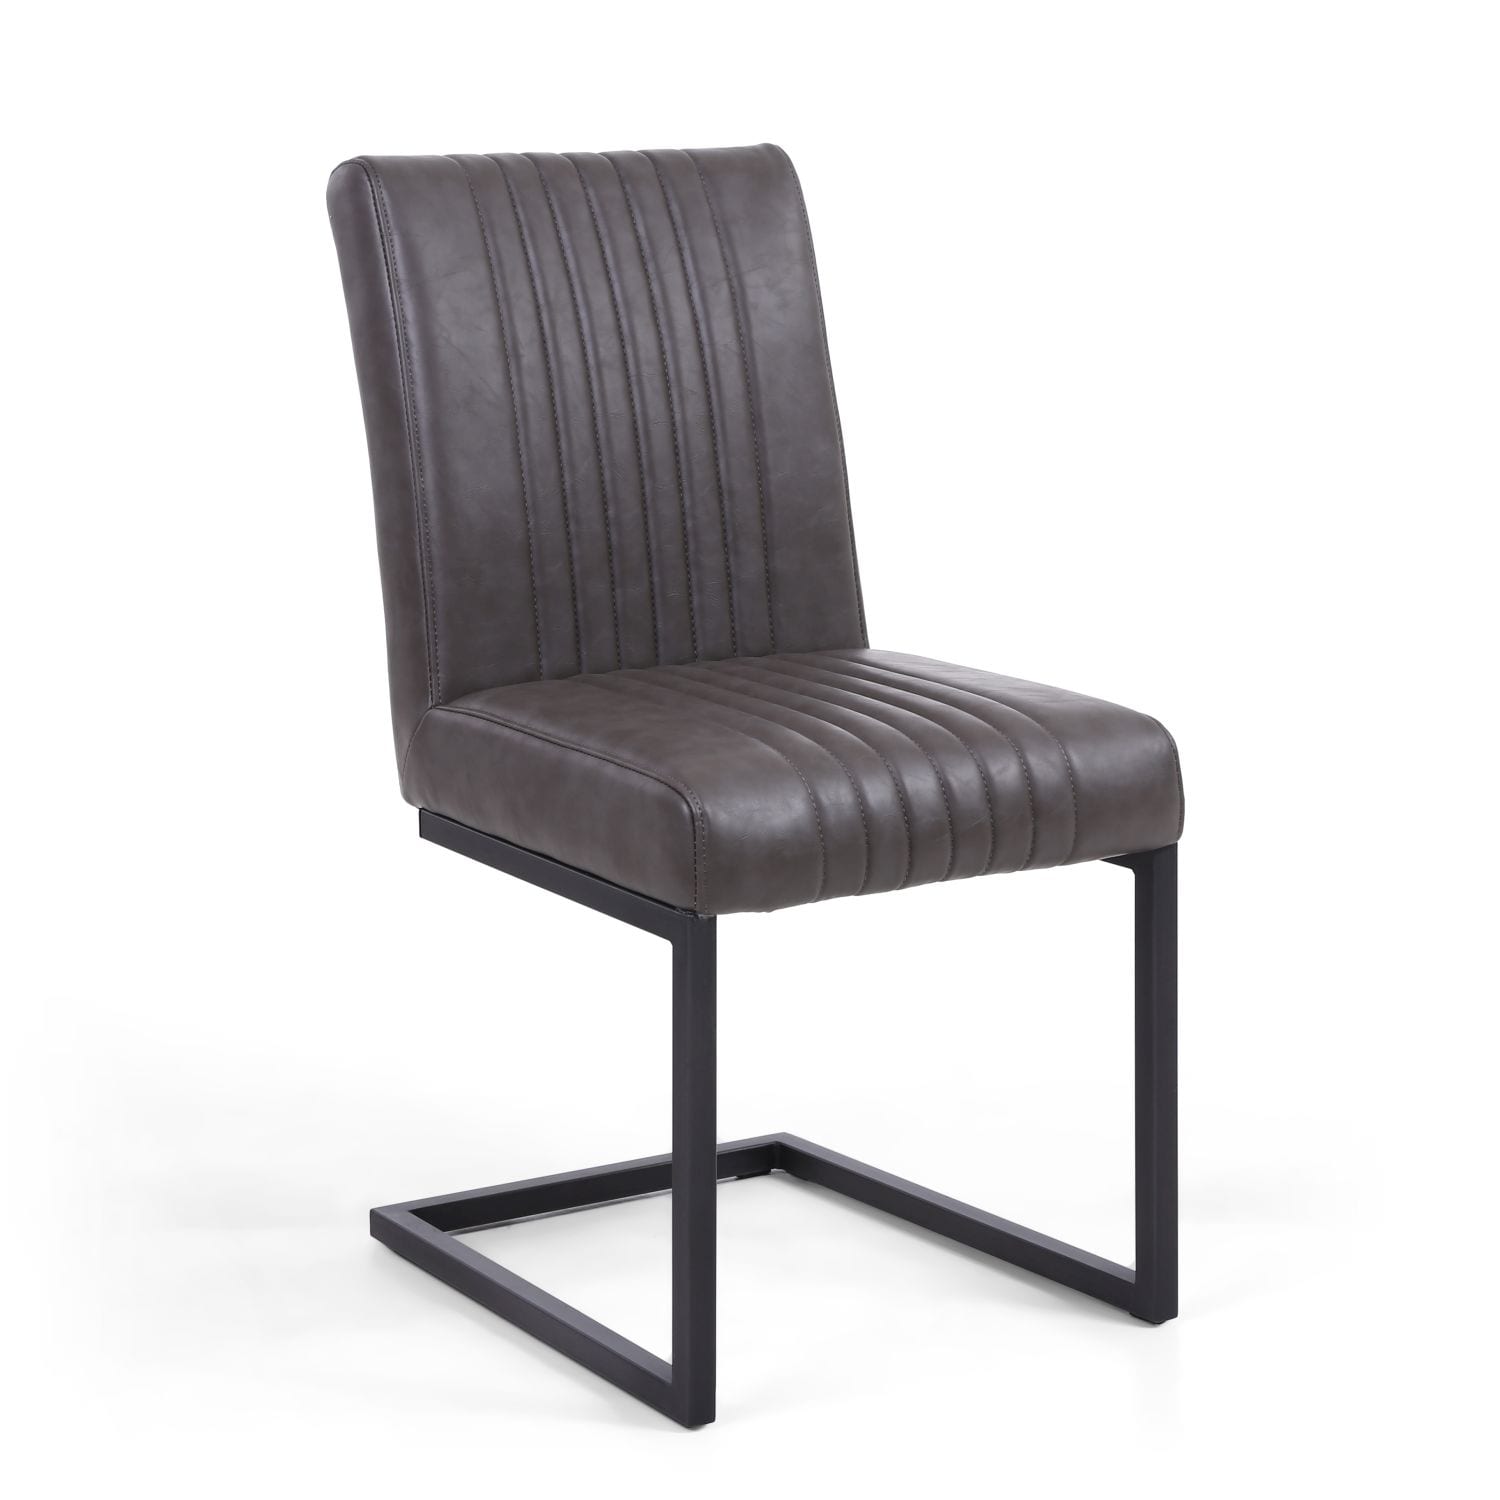 Arrow Cantilever Leather Effect Grey Chair